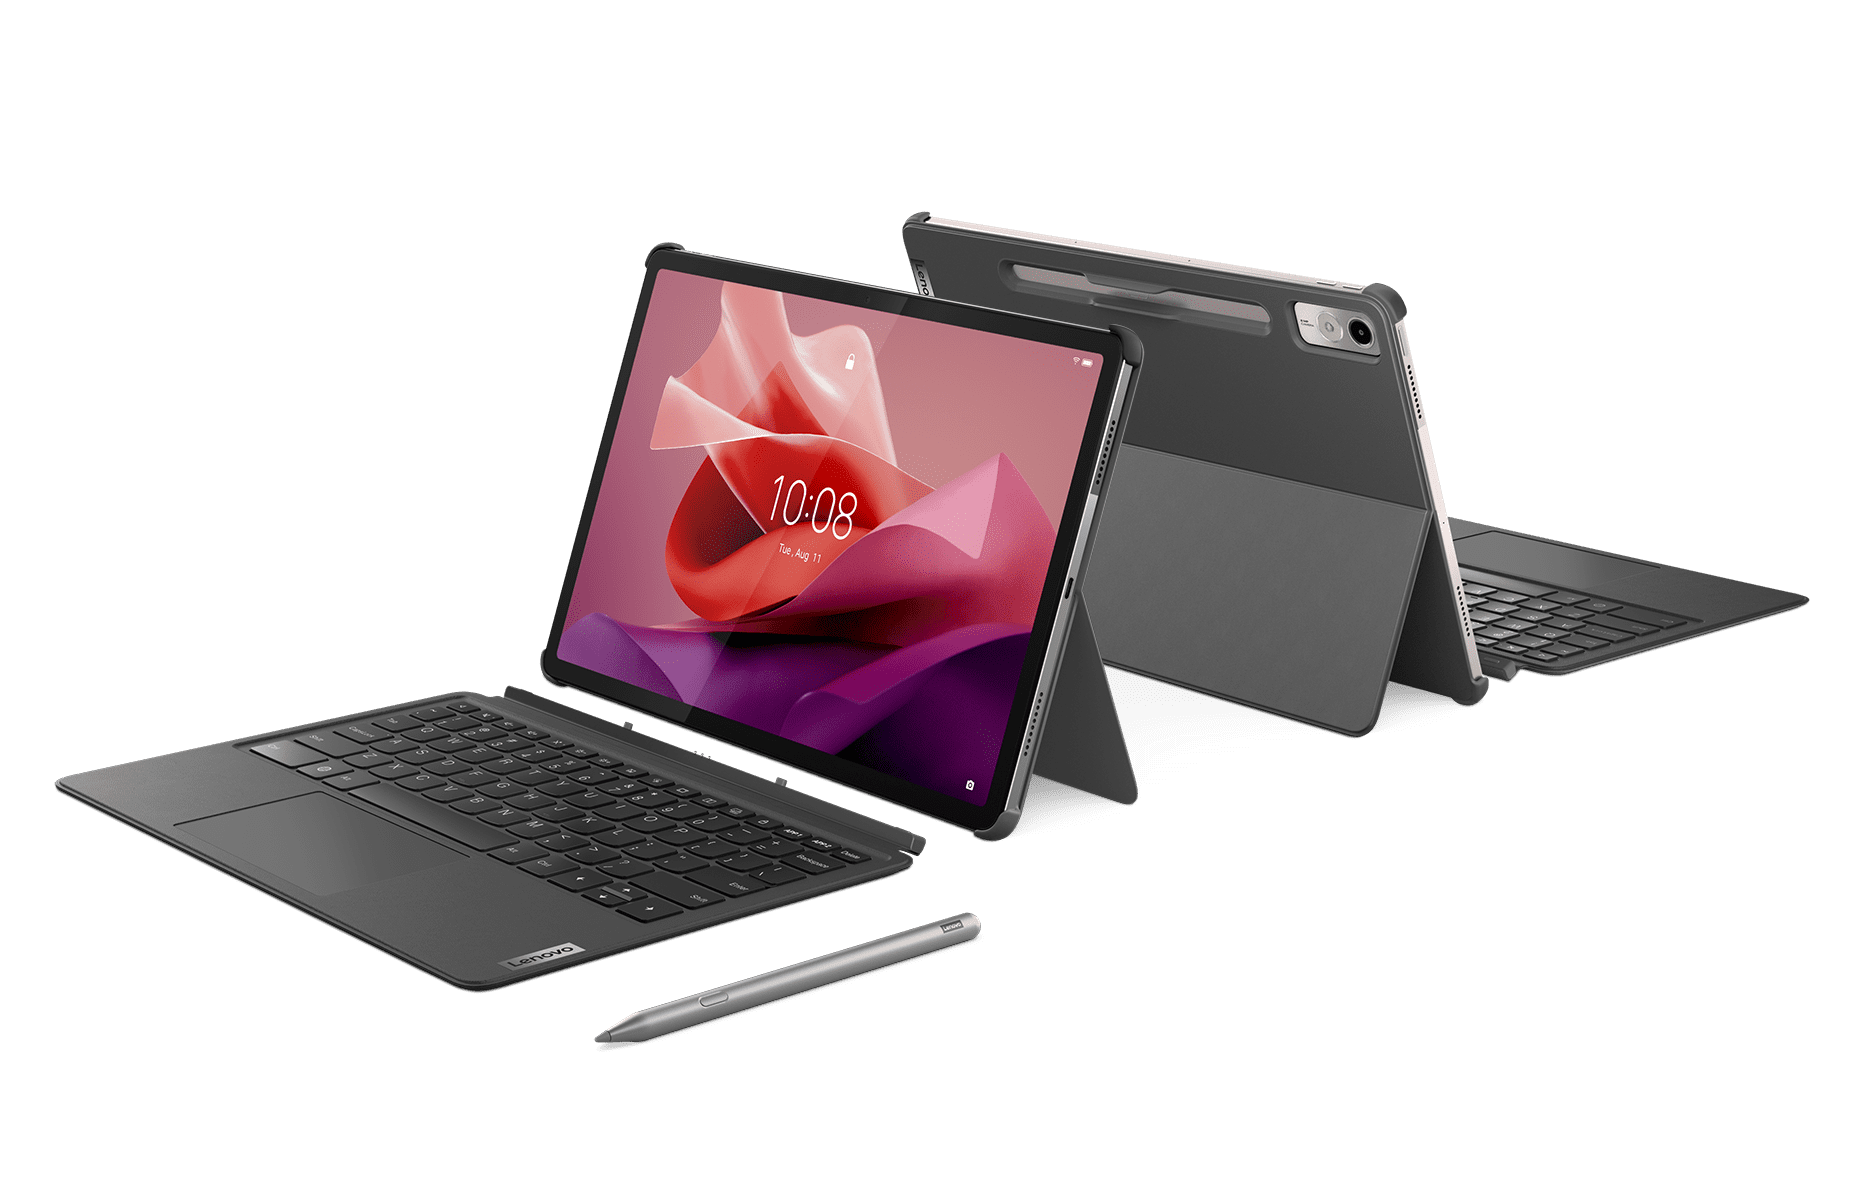 Introducing the 5G multitasking more mobility, StoryHub Tab Tab P12 - learning, and consumer Lenovo Lenovo M10 for new tablets